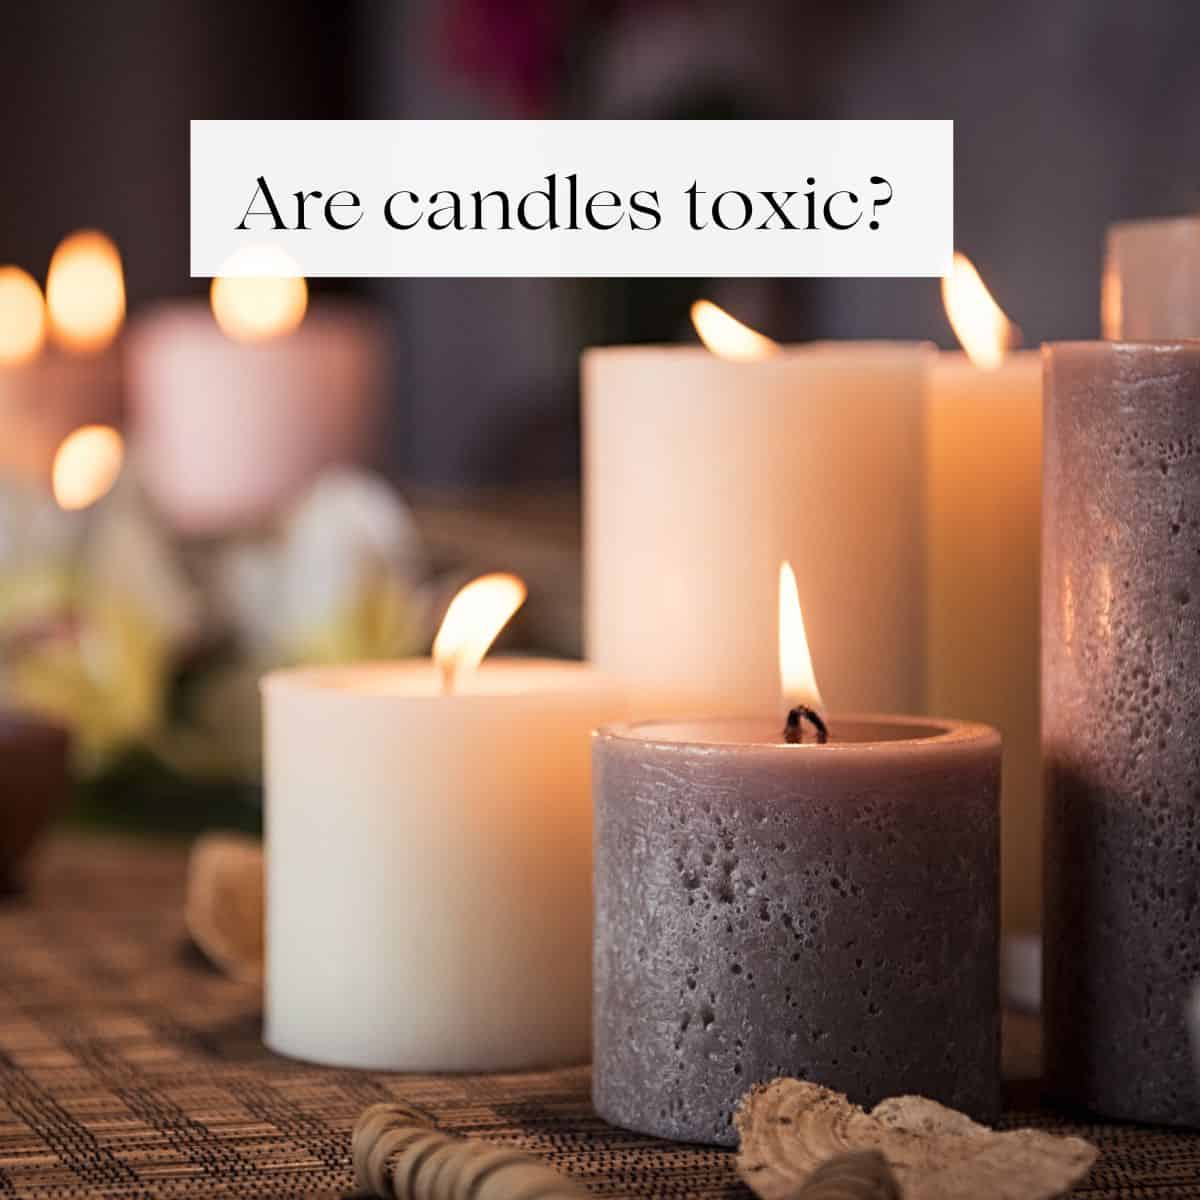 Many burning candles with the title "Are Candles Toxic?" over them. 